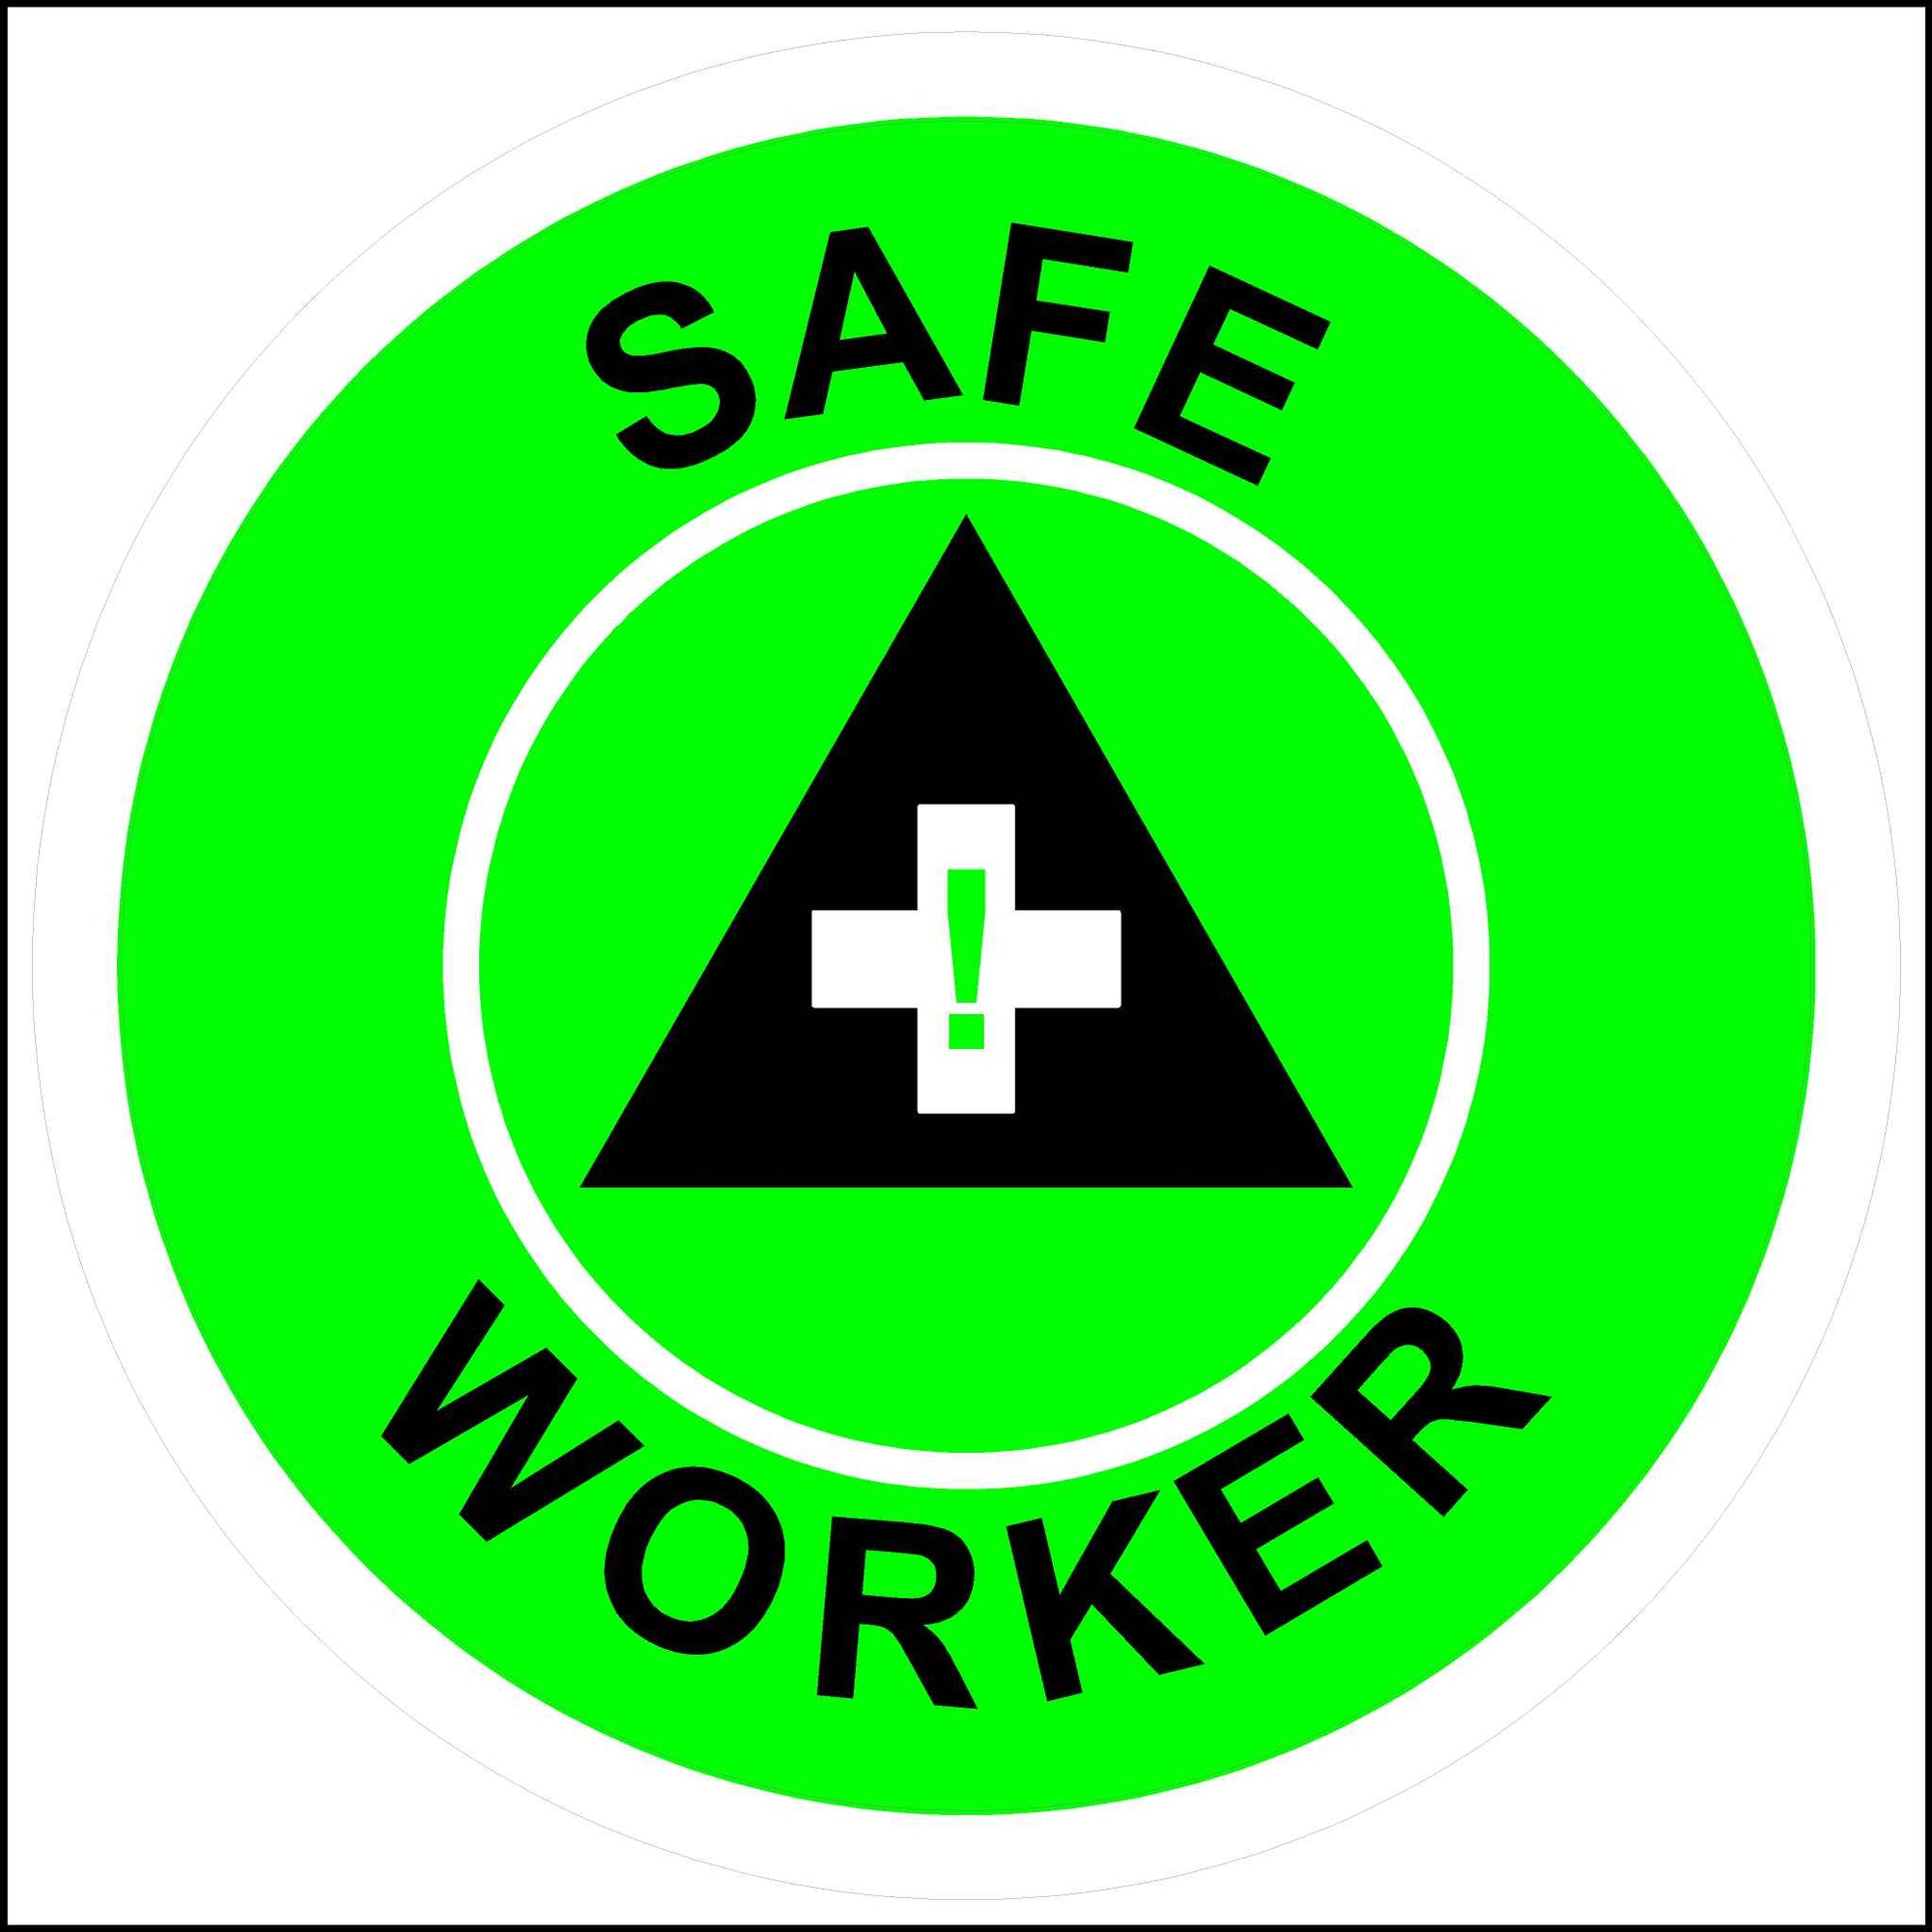 Safe worker hard had sticker printed in bright green and black